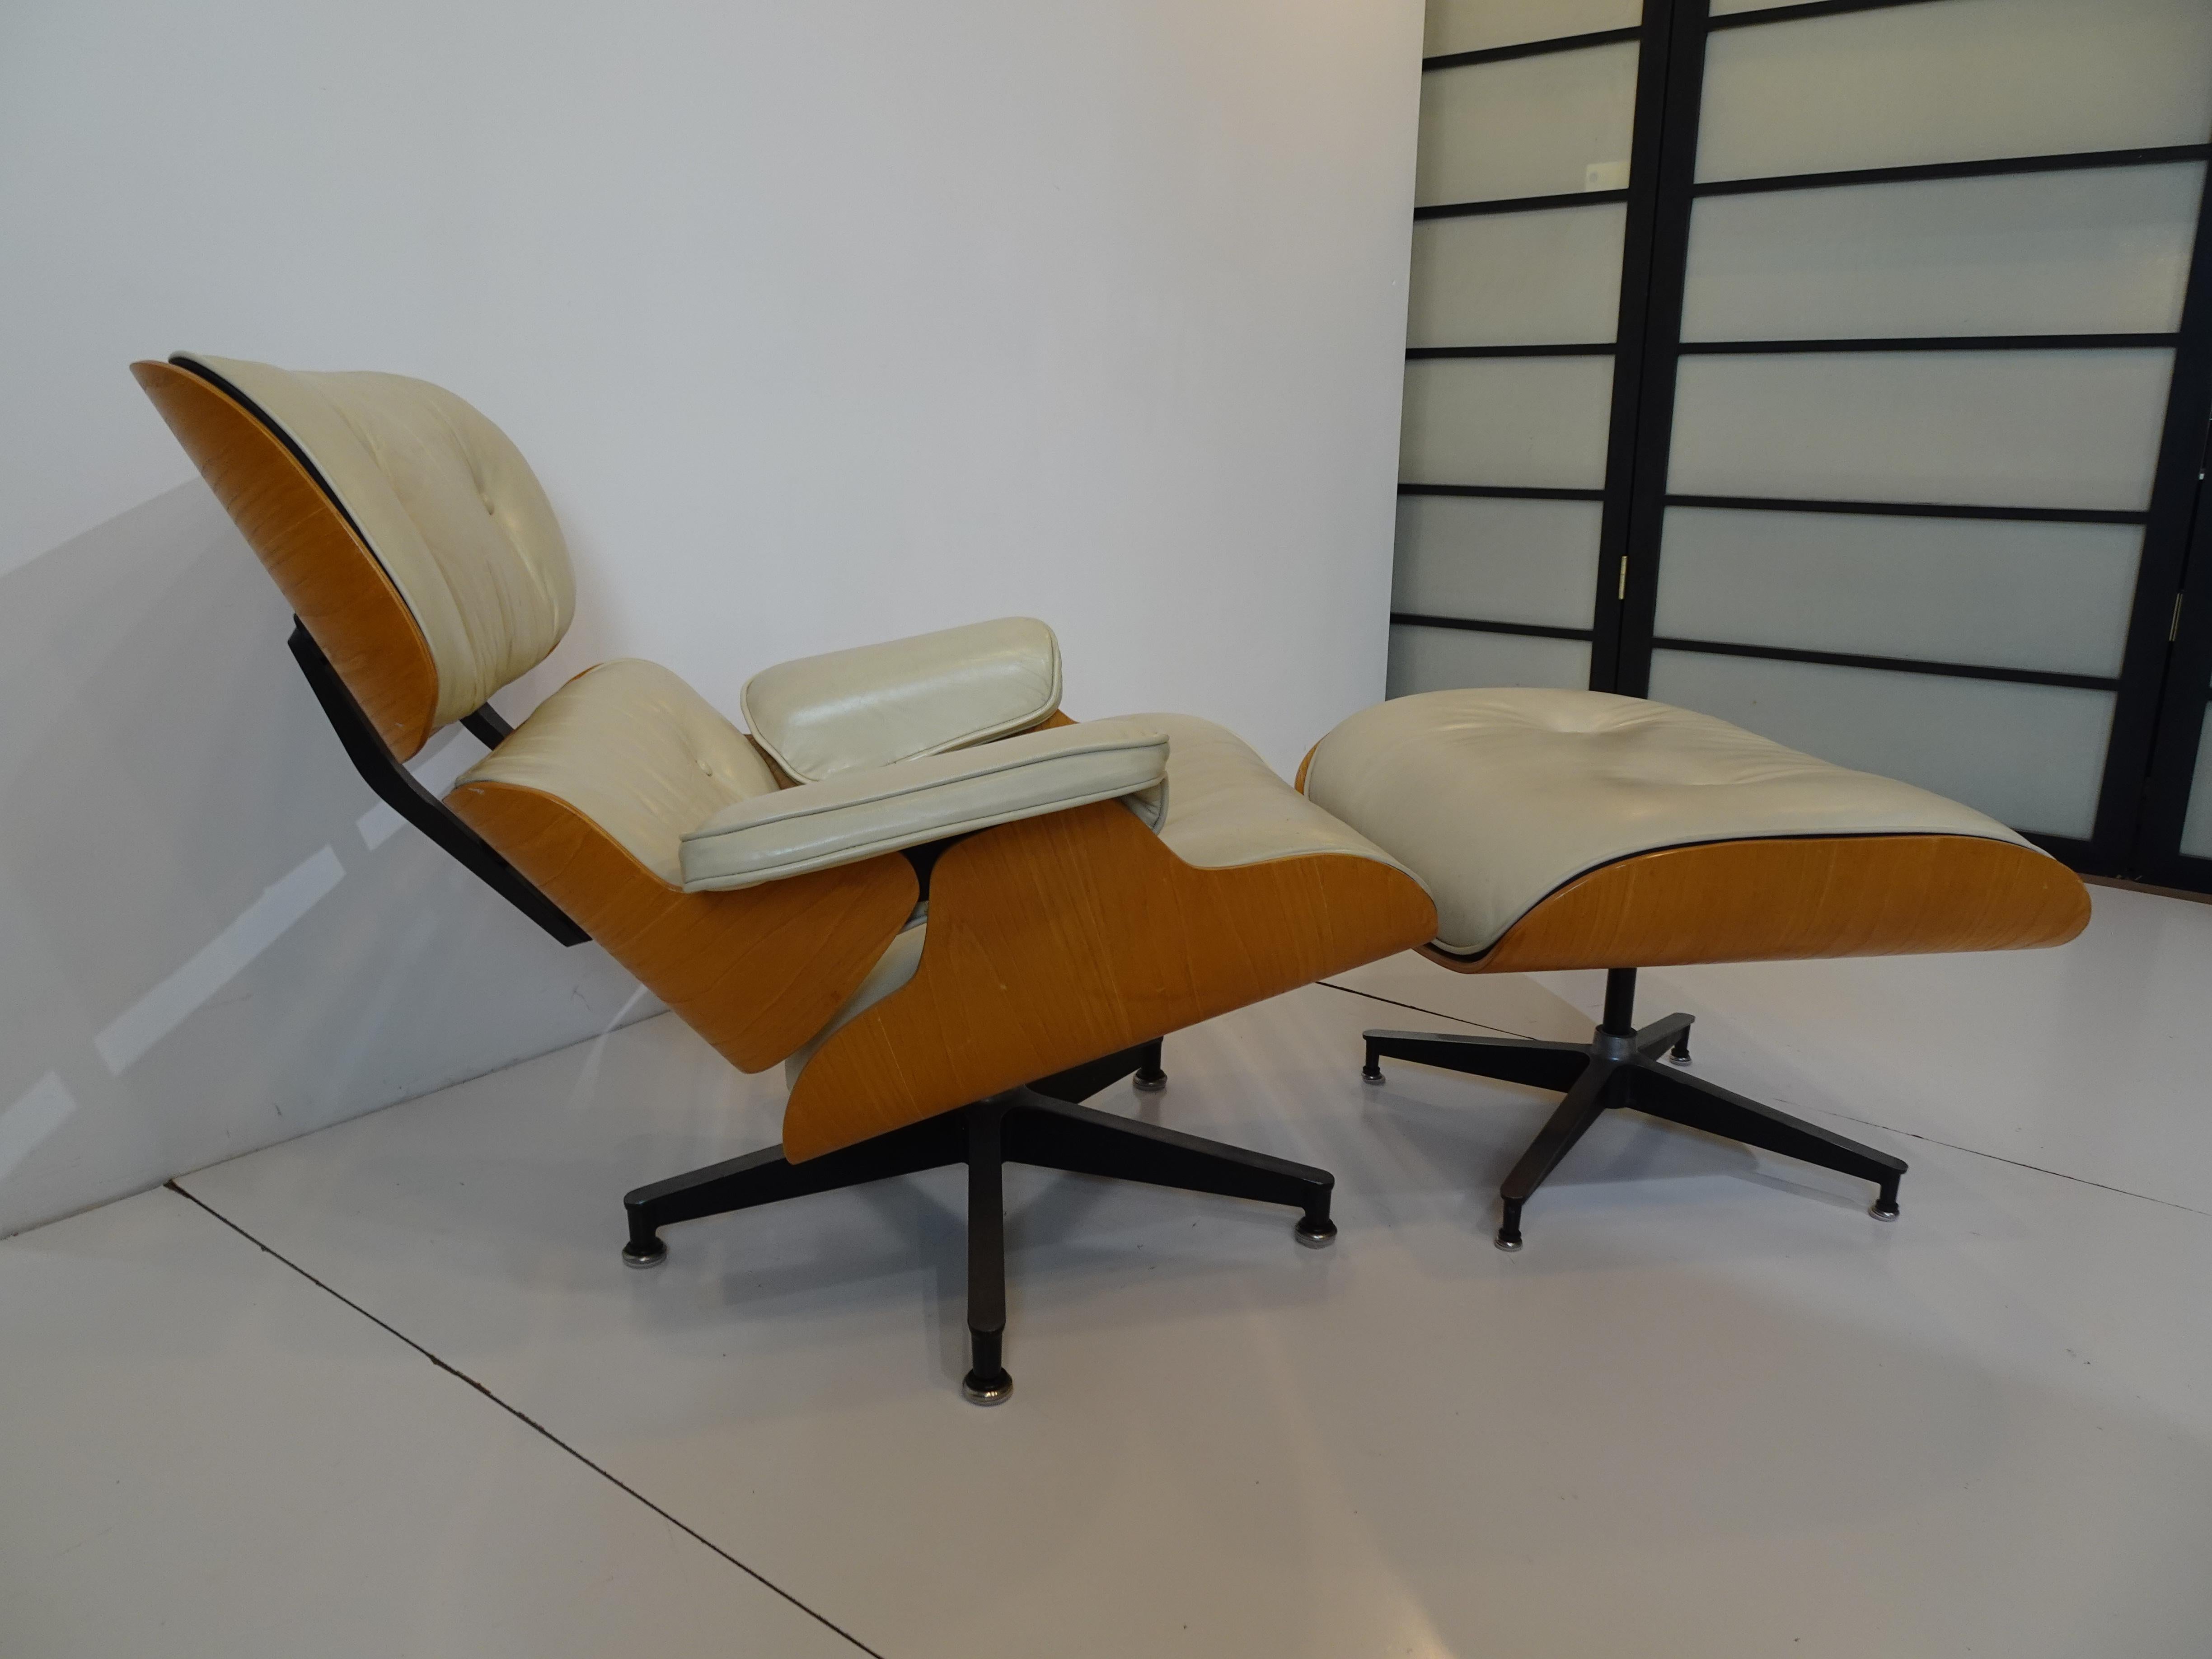 A very nice iconic Eames 670 lounge chair with 671 ottoman special ordered by the original former owner in a soft buttery ivory leather with American oak shell . A rare combination giving the chair a light look and feel very different then the dark